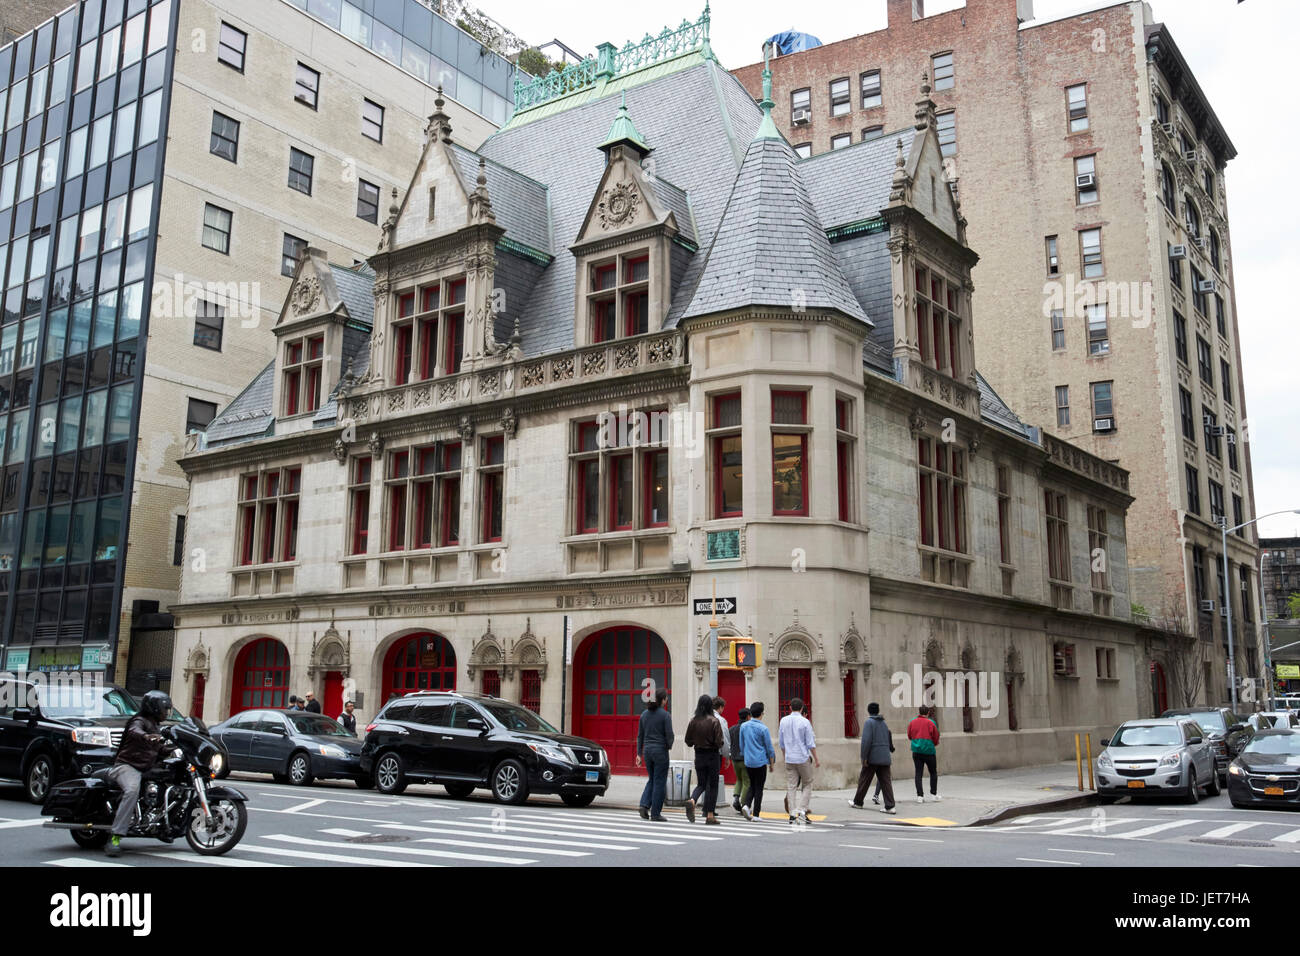 Downtown Community Television Centre ex motore 31 firehouse New York City USA Foto Stock